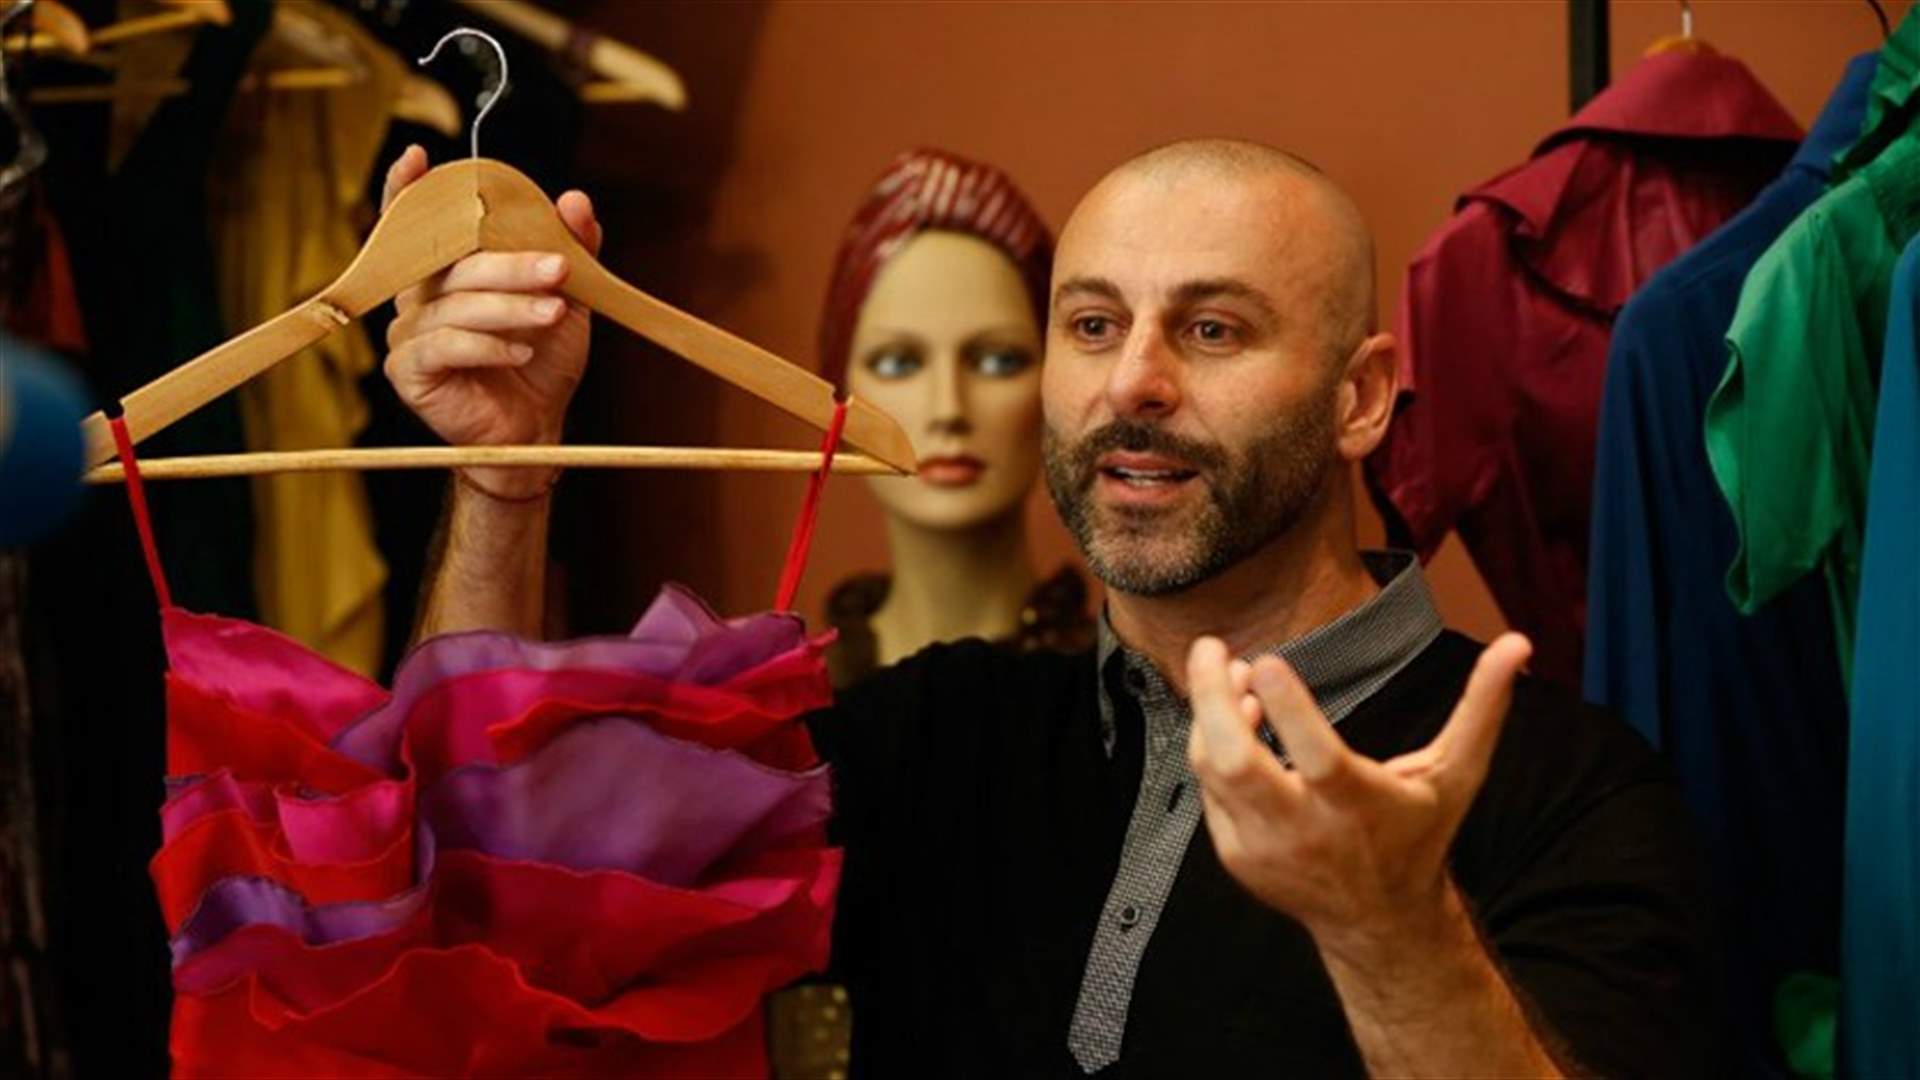 Celebrity Palestinian-American designer brings collection to West Bank